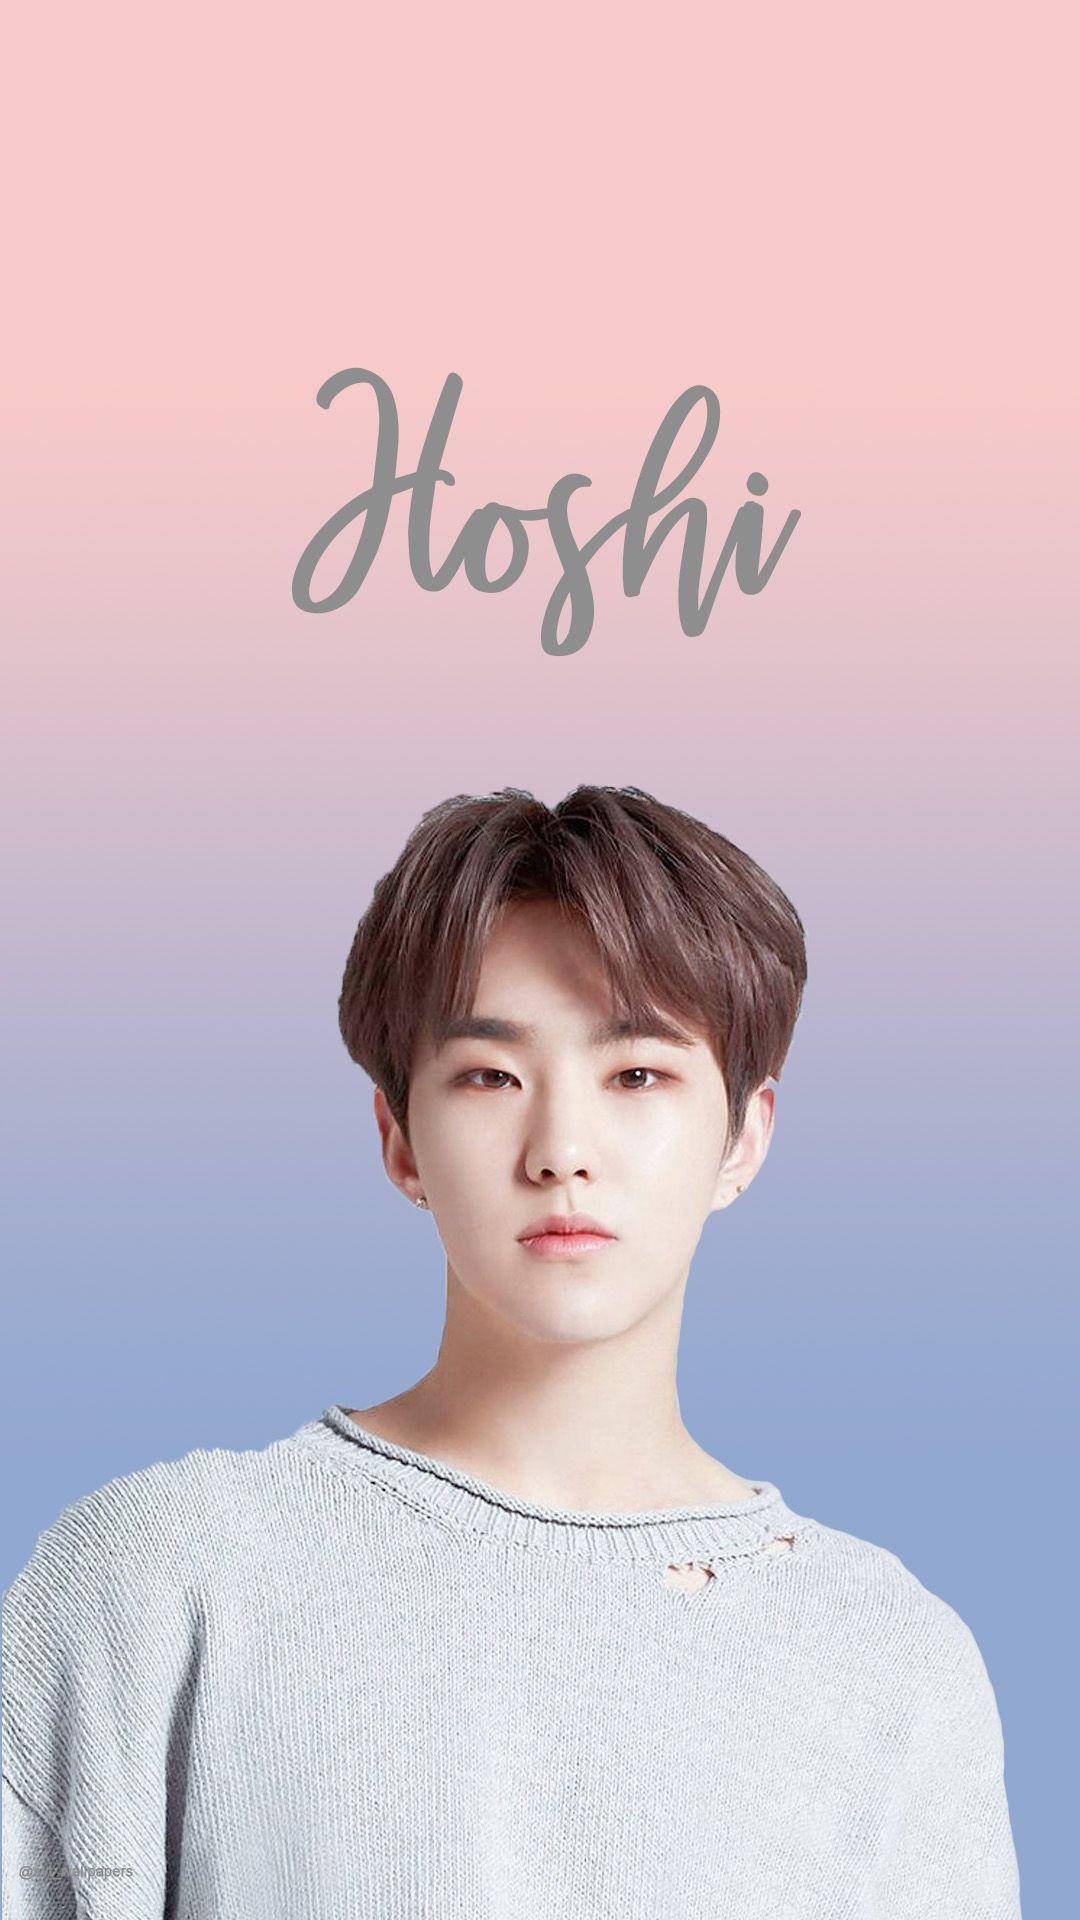 Top 999+ Hoshi Wallpapers Full HD, 4K✅Free to Use